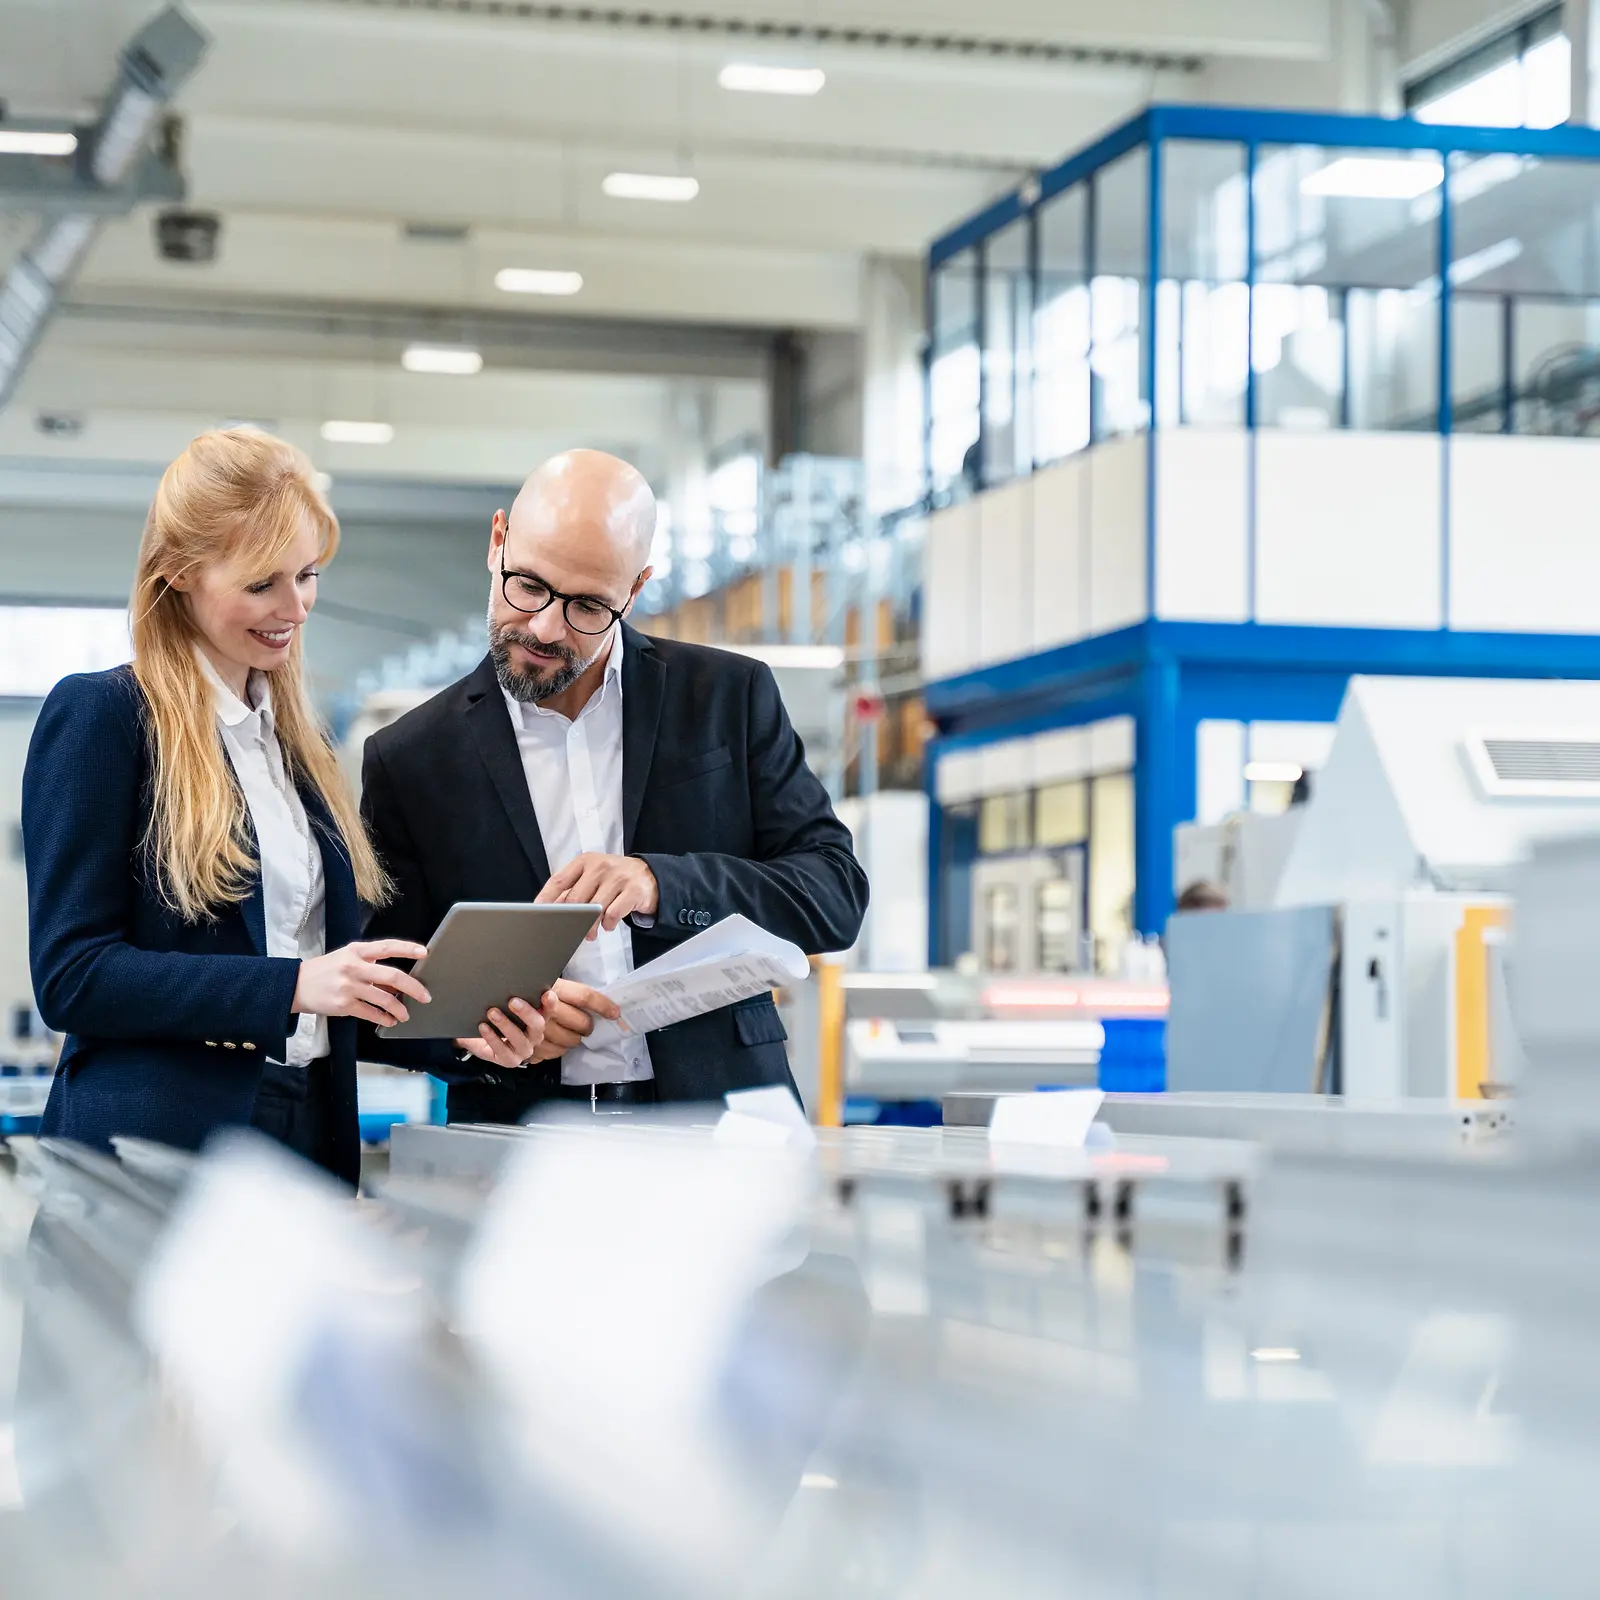 Two business people stand in a manufacturing site and look at a document